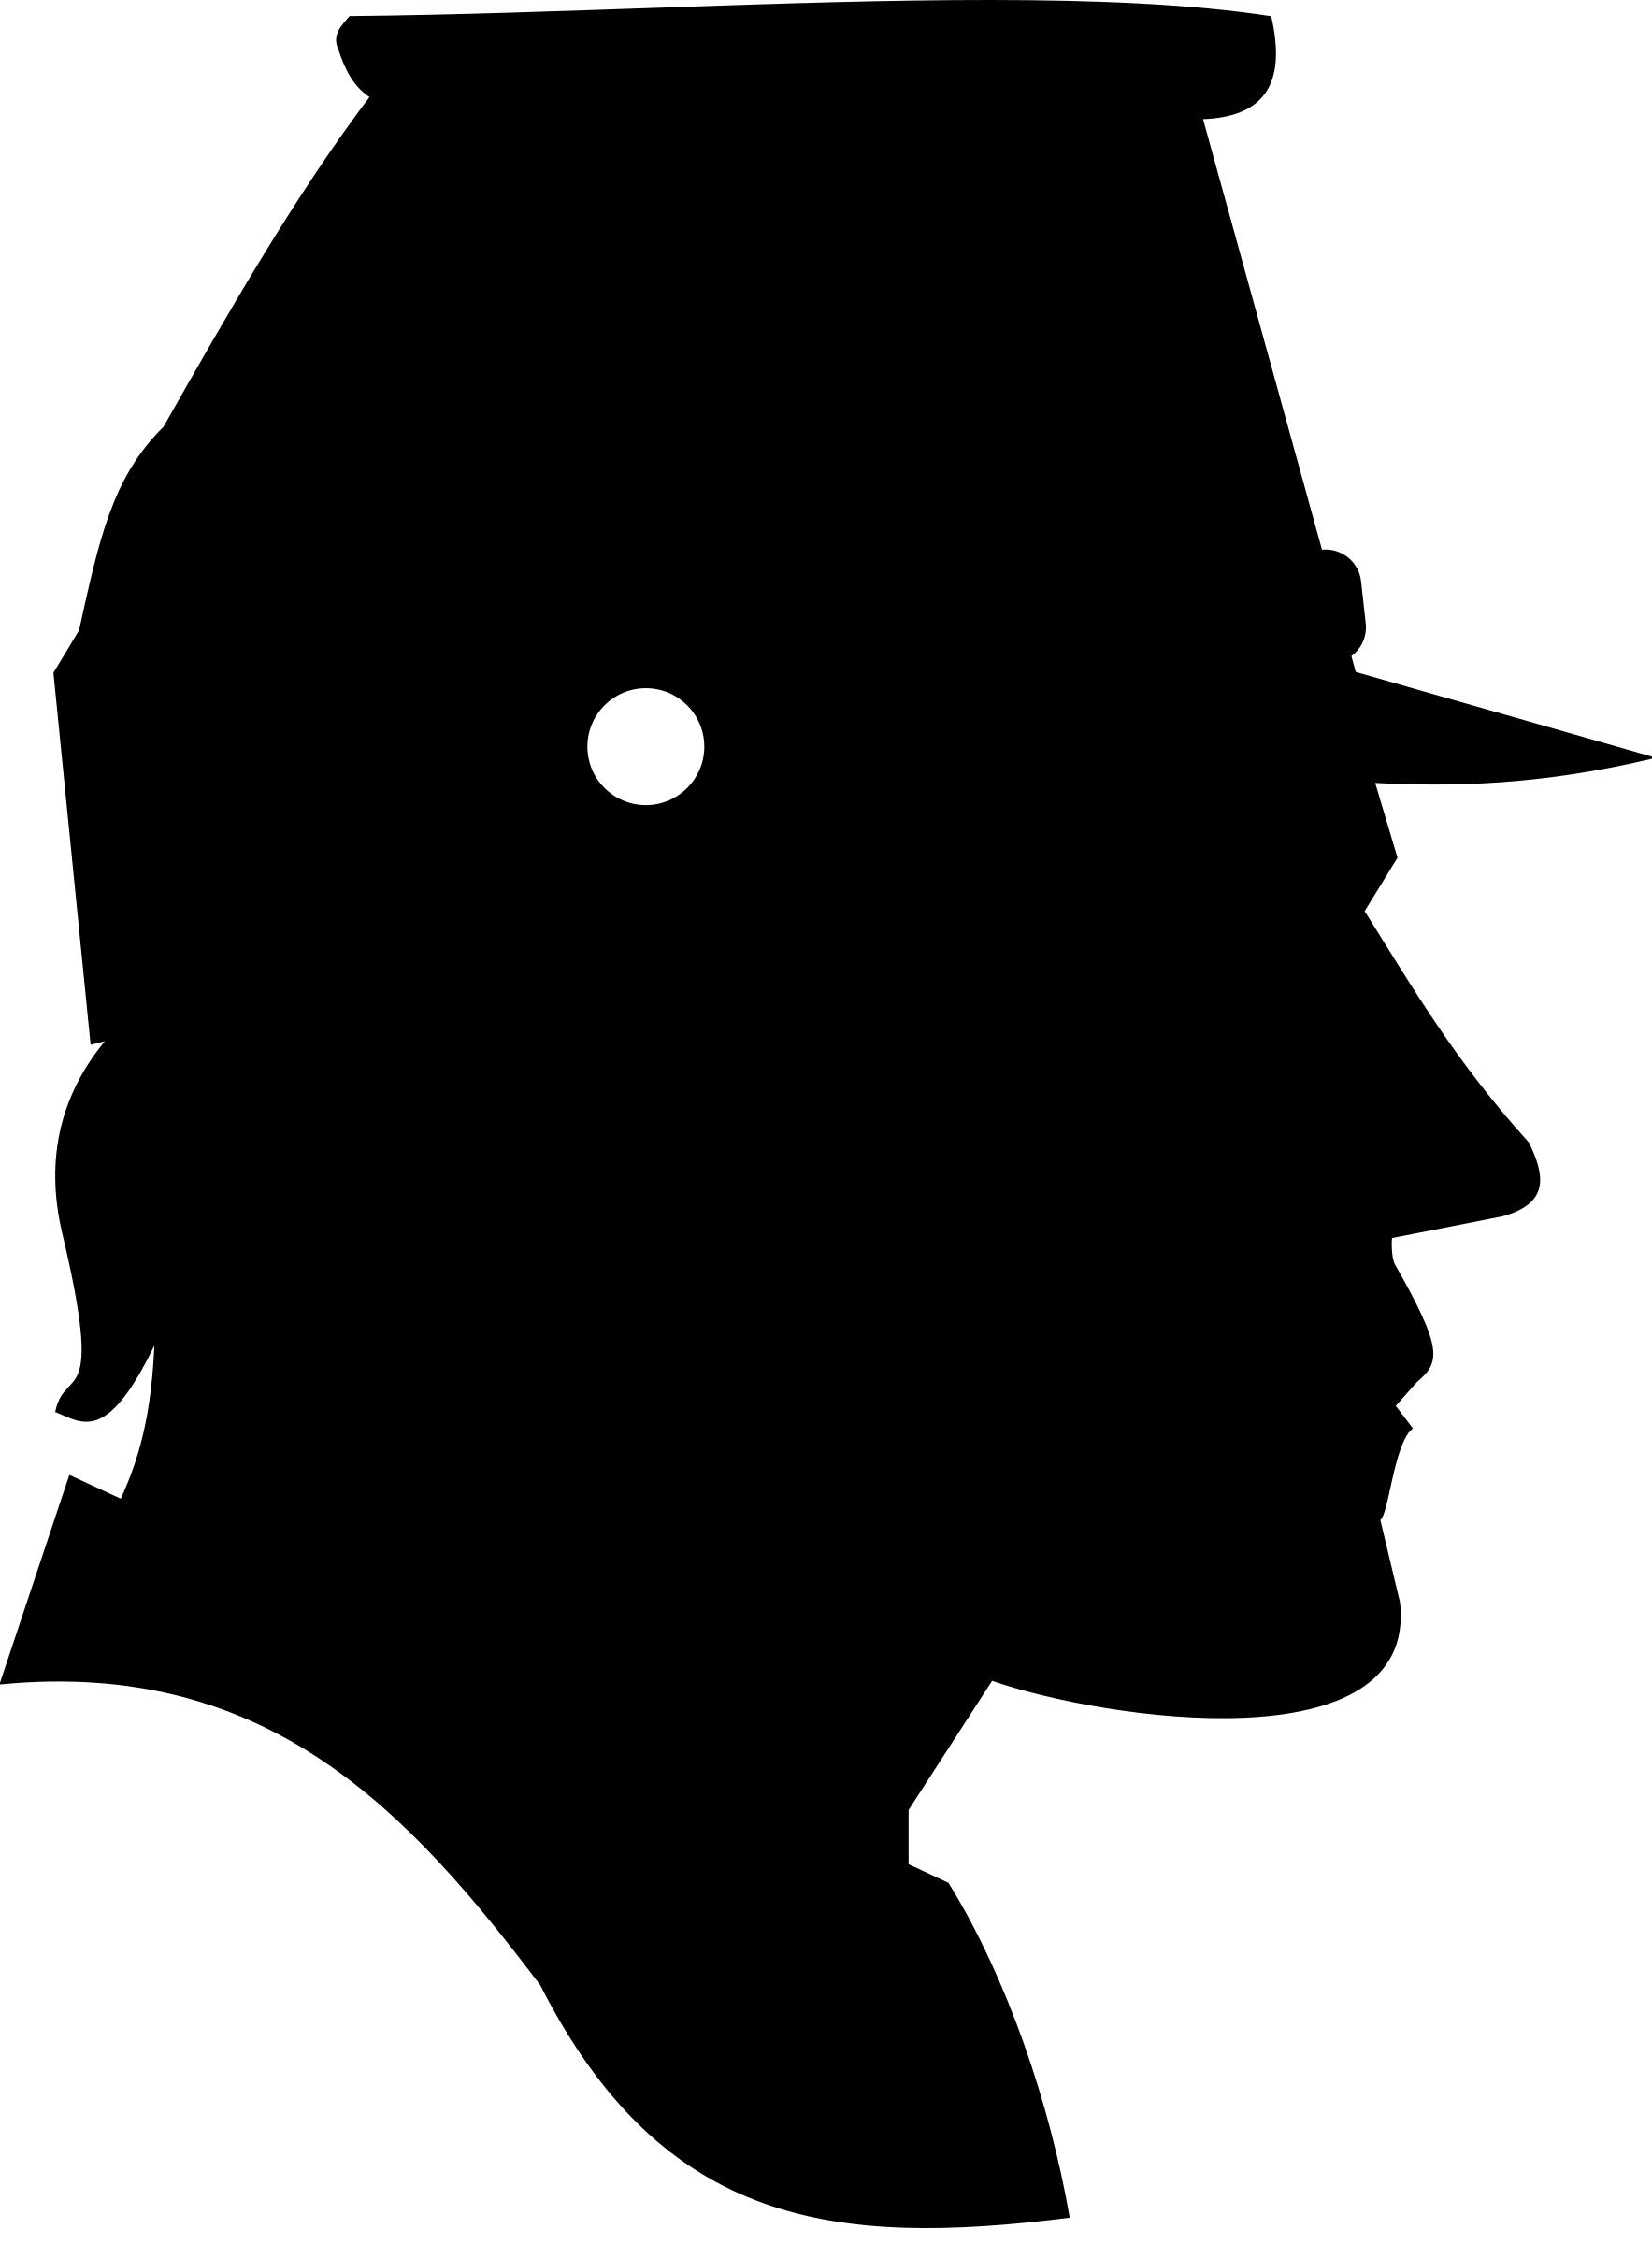 US Civil War Soldier Silhouette PNG icons